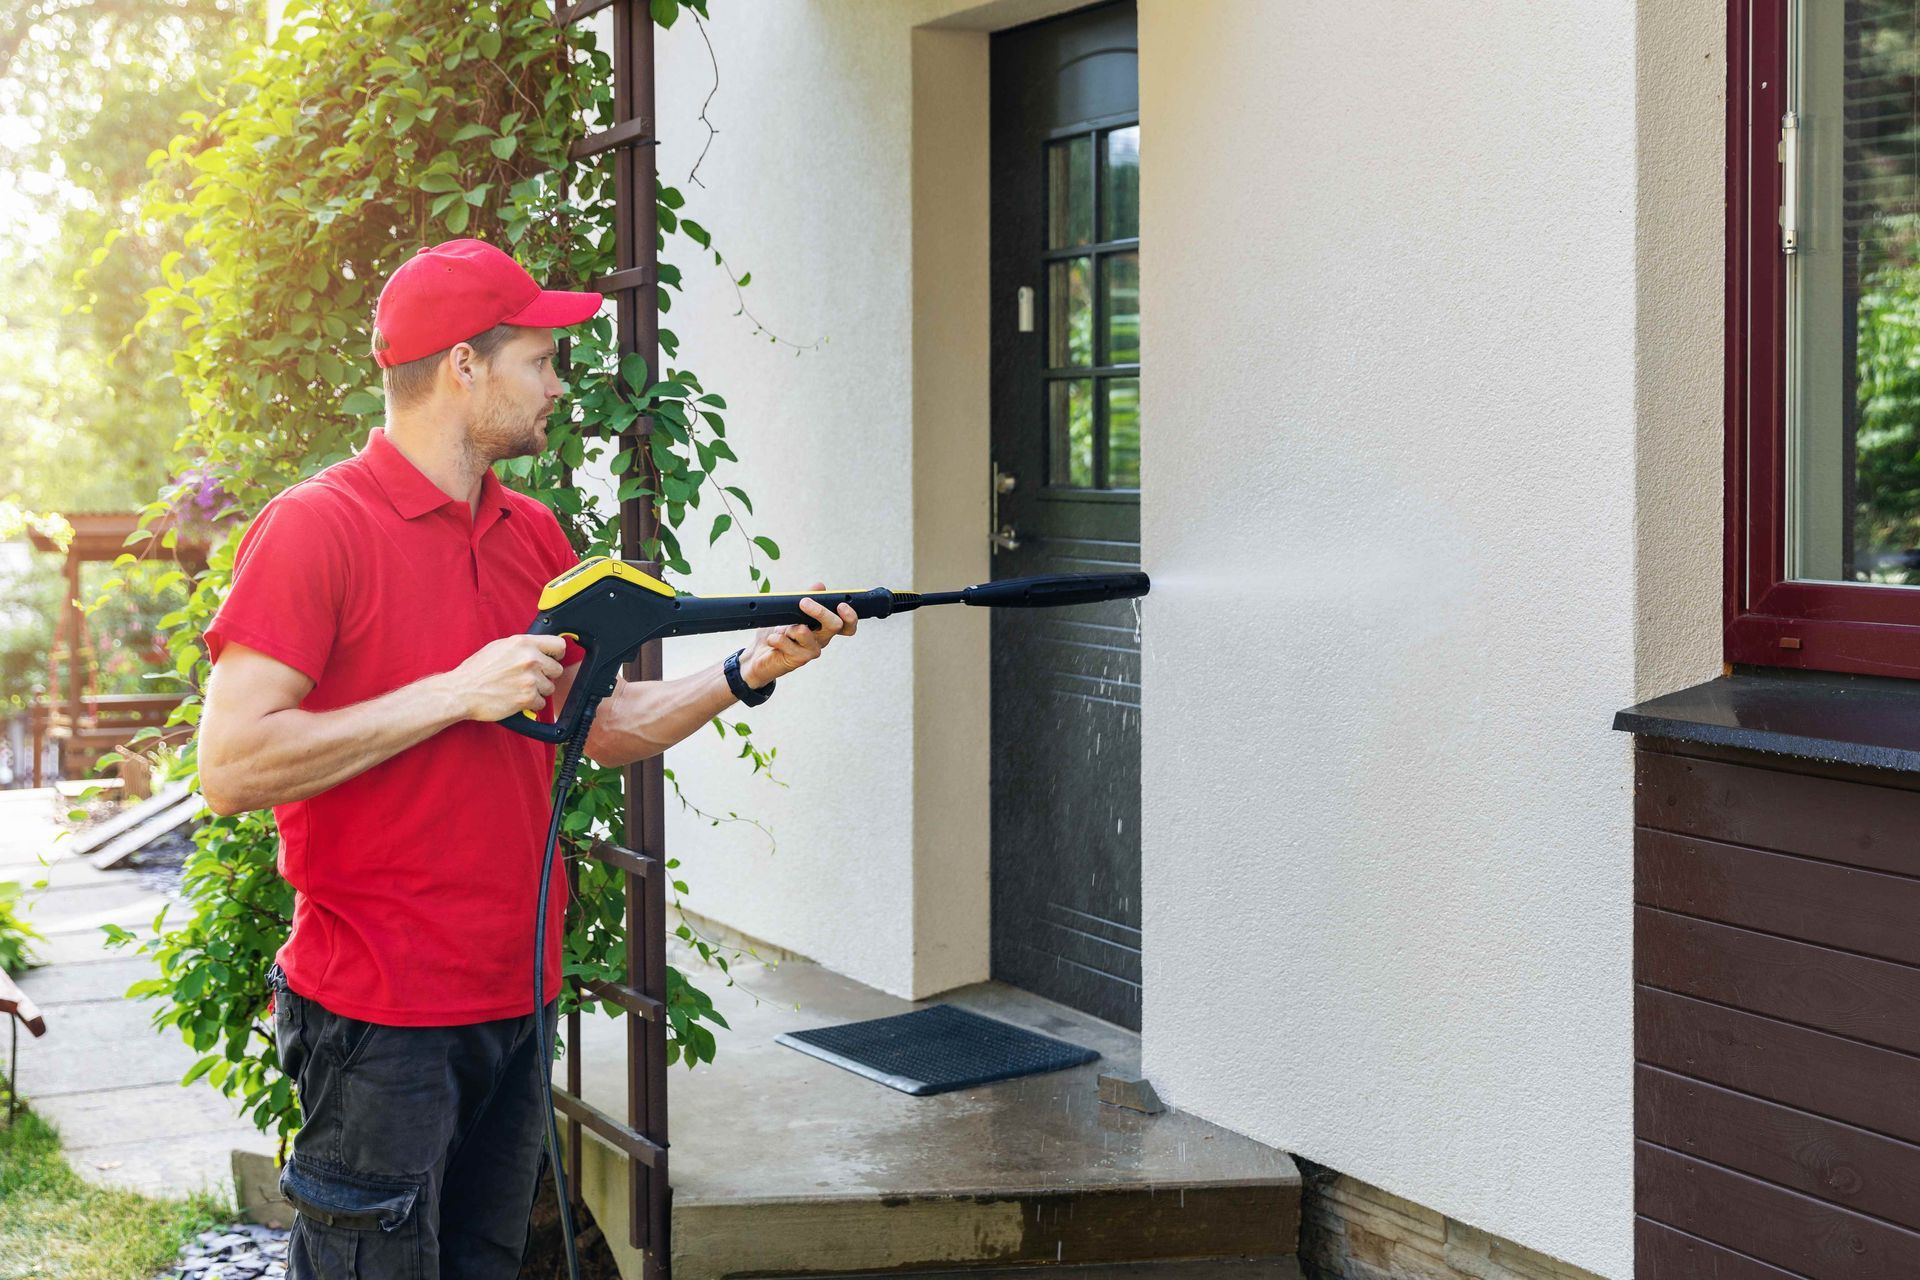 A man is cleaning the side of a house with a high pressure washer